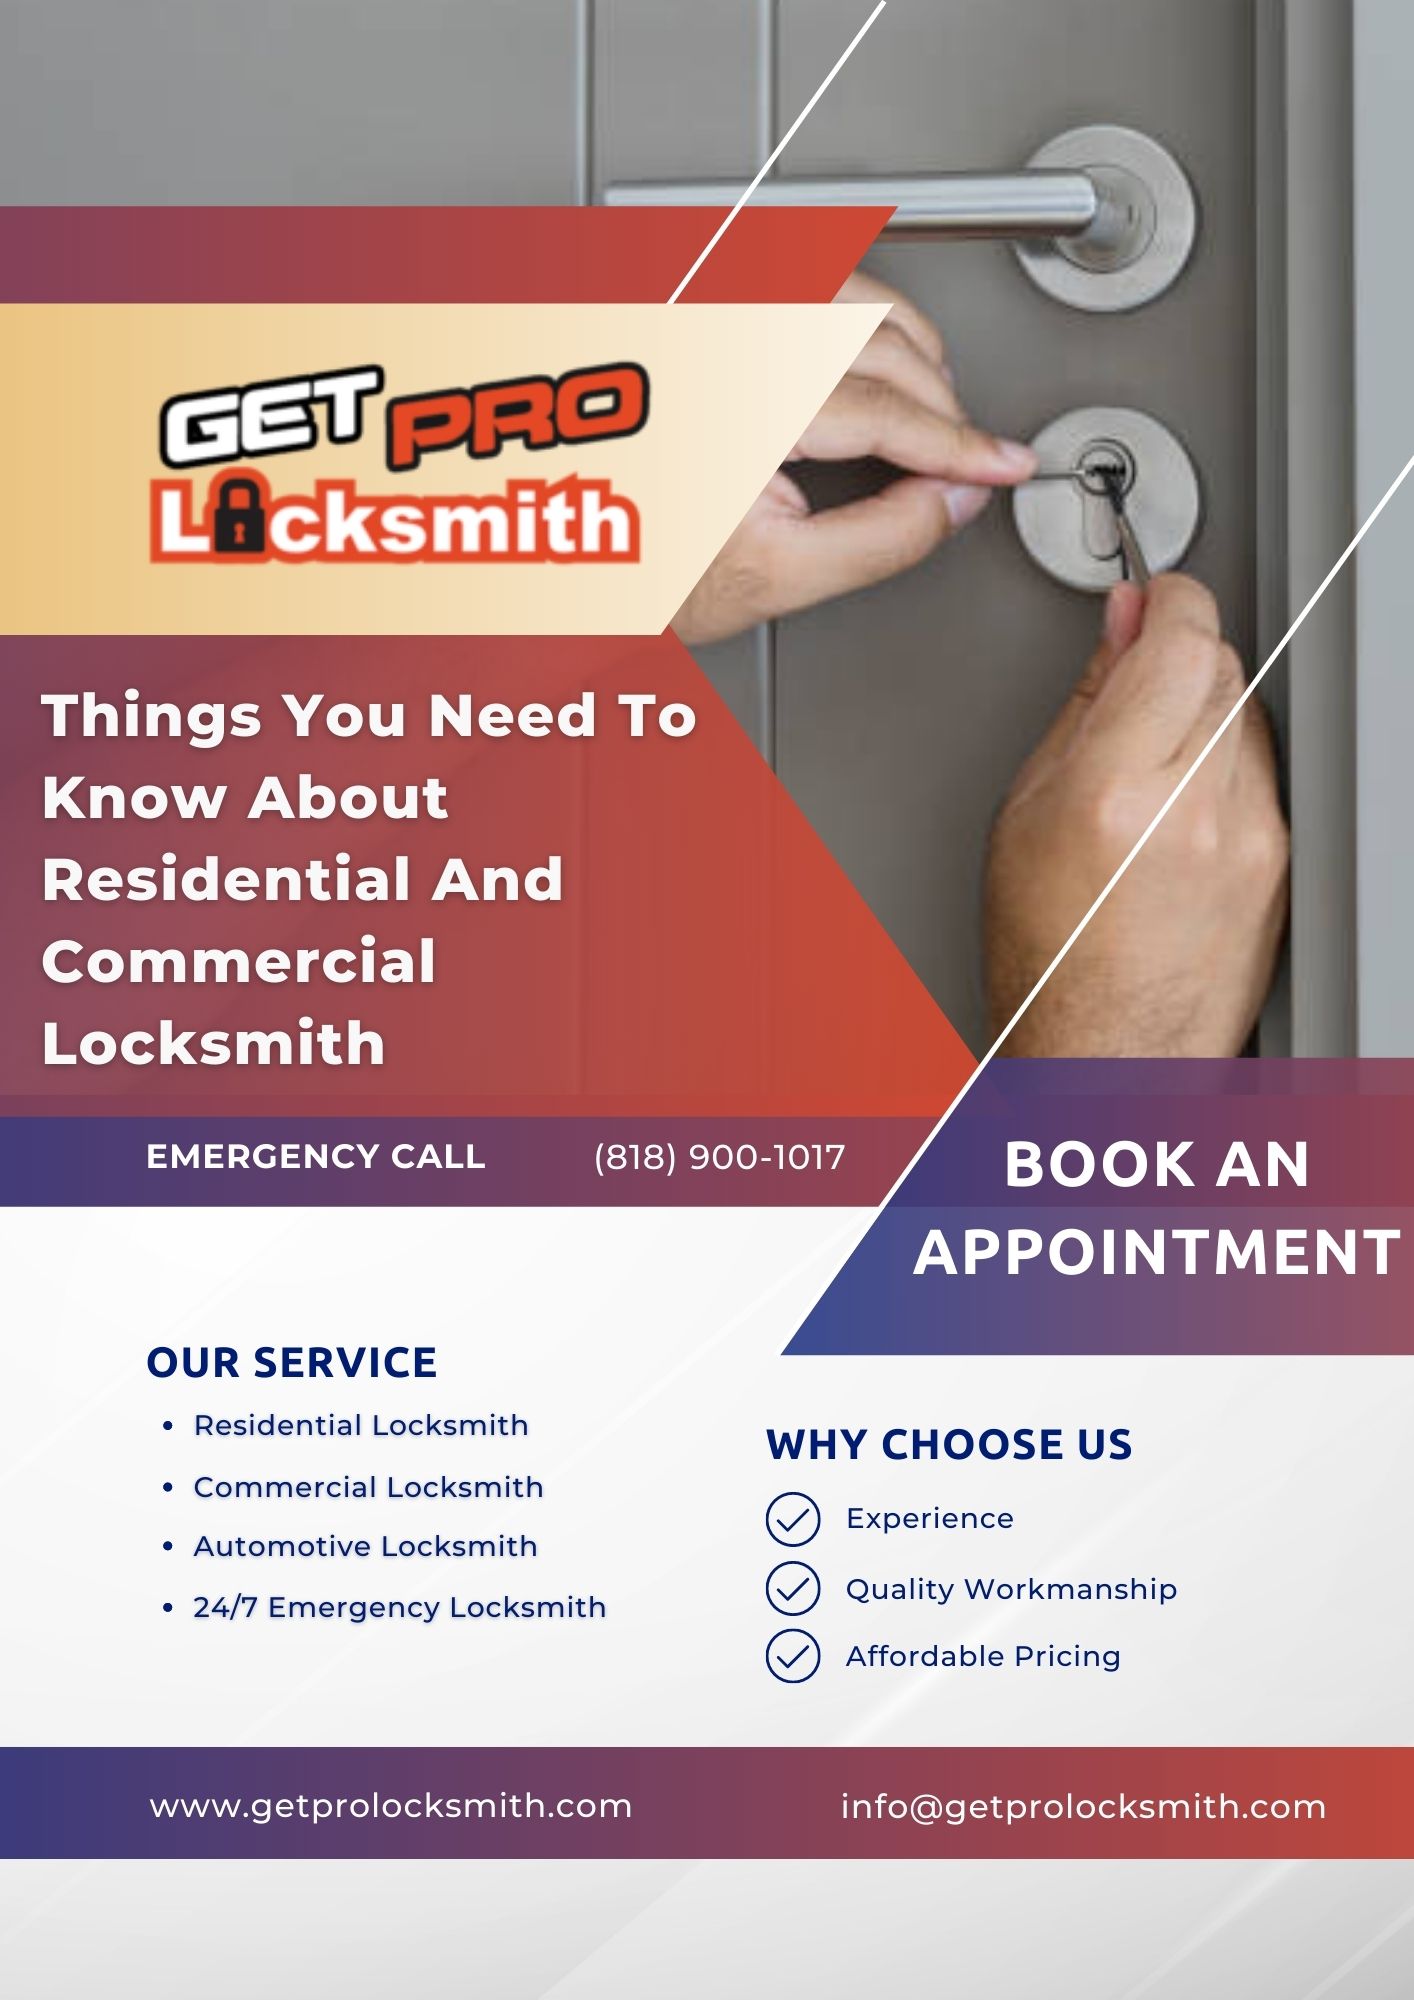 Things You Need To Know About Residential And Commercial Locksmith